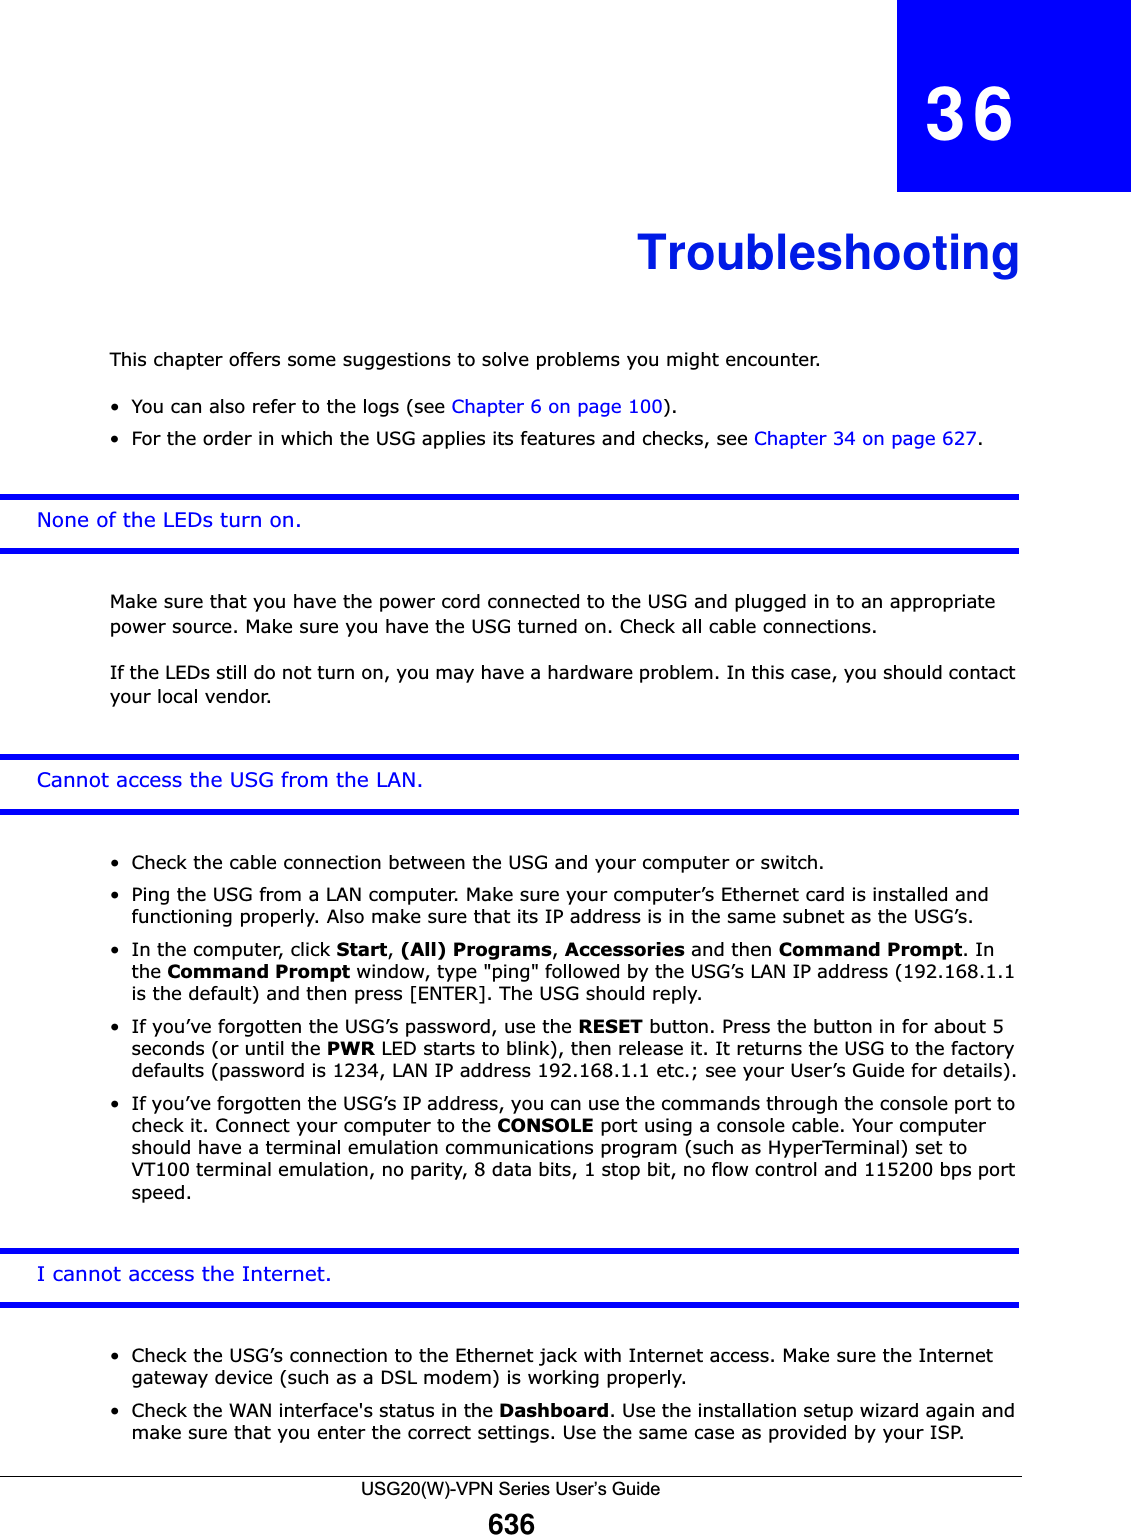 USG20(W)-VPN Series User’s Guide636CHAPTER   36TroubleshootingThis chapter offers some suggestions to solve problems you might encounter. • You can also refer to the logs (see Chapter 6 on page 100). • For the order in which the USG applies its features and checks, see Chapter 34 on page 627.None of the LEDs turn on.Make sure that you have the power cord connected to the USG and plugged in to an appropriate power source. Make sure you have the USG turned on. Check all cable connections.If the LEDs still do not turn on, you may have a hardware problem. In this case, you should contact your local vendor.Cannot access the USG from the LAN.• Check the cable connection between the USG and your computer or switch. • Ping the USG from a LAN computer. Make sure your computer’s Ethernet card is installed and functioning properly. Also make sure that its IP address is in the same subnet as the USG’s.• In the computer, click Start, (All) Programs, Accessories and then Command Prompt. In the Command Prompt window, type &quot;ping&quot; followed by the USG’s LAN IP address (192.168.1.1 is the default) and then press [ENTER]. The USG should reply.• If you’ve forgotten the USG’s password, use the RESET button. Press the button in for about 5 seconds (or until the PWR LED starts to blink), then release it. It returns the USG to the factory defaults (password is 1234, LAN IP address 192.168.1.1 etc.; see your User’s Guide for details).• If you’ve forgotten the USG’s IP address, you can use the commands through the console port to check it. Connect your computer to the CONSOLE port using a console cable. Your computer should have a terminal emulation communications program (such as HyperTerminal) set to VT100 terminal emulation, no parity, 8 data bits, 1 stop bit, no flow control and 115200 bps port speed. I cannot access the Internet.• Check the USG’s connection to the Ethernet jack with Internet access. Make sure the Internet gateway device (such as a DSL modem) is working properly. • Check the WAN interface&apos;s status in the Dashboard. Use the installation setup wizard again and make sure that you enter the correct settings. Use the same case as provided by your ISP.